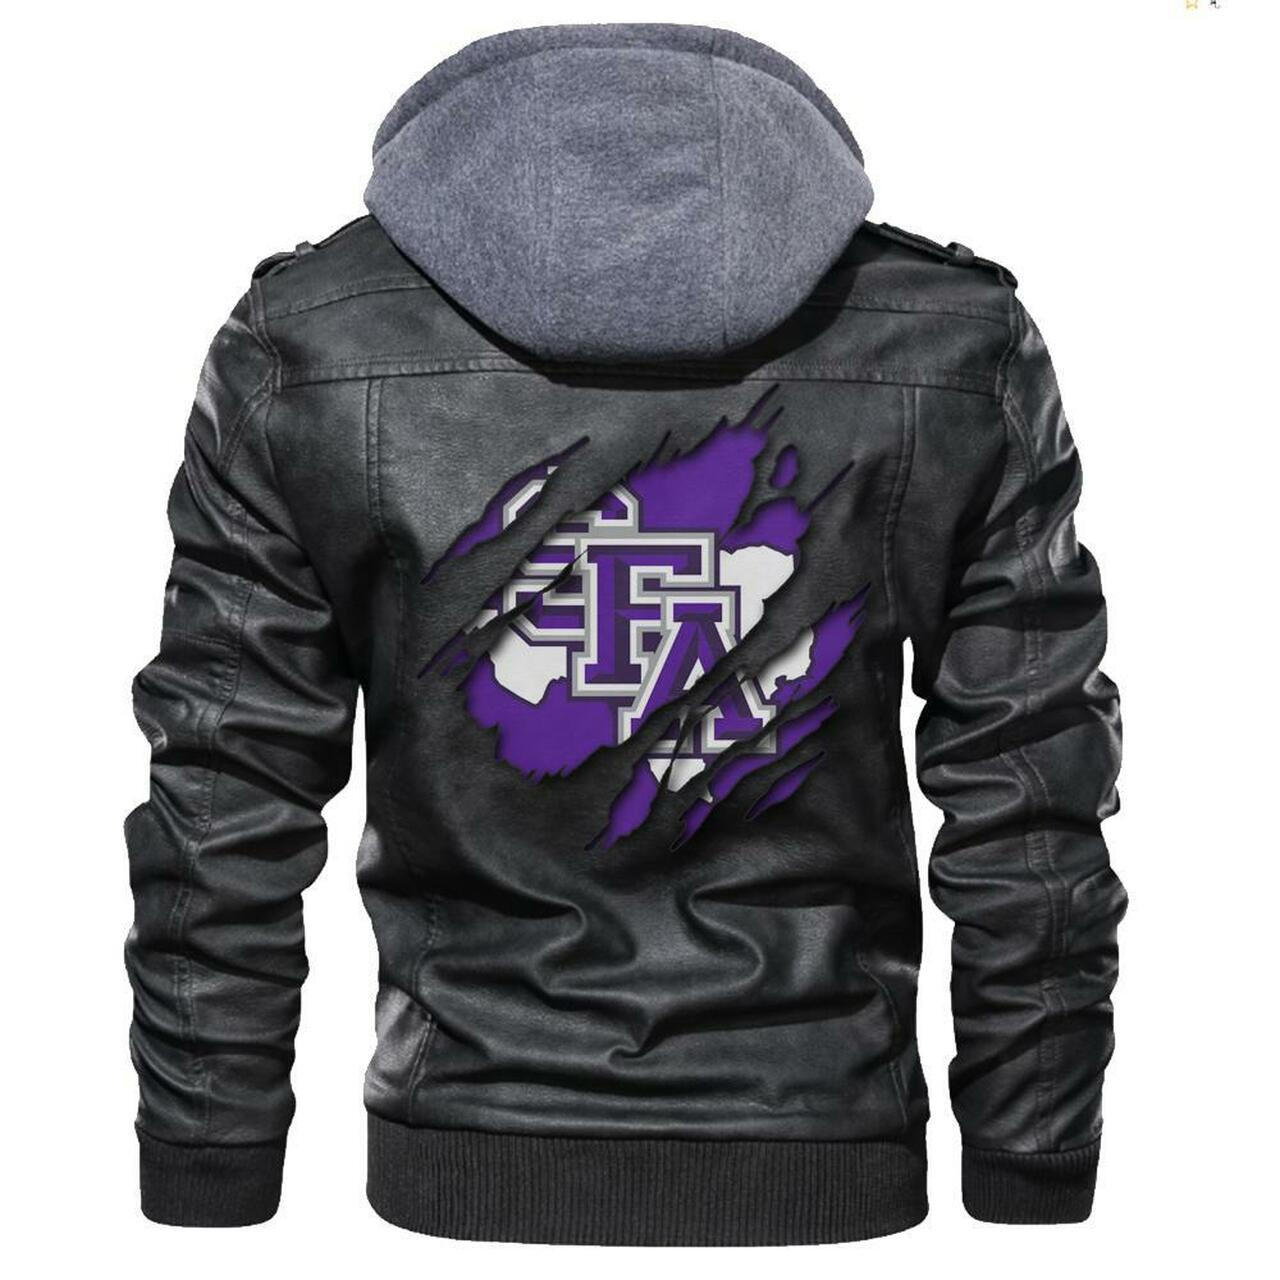 This leather Jacket will look great on you and make you stand out from the crowd 143